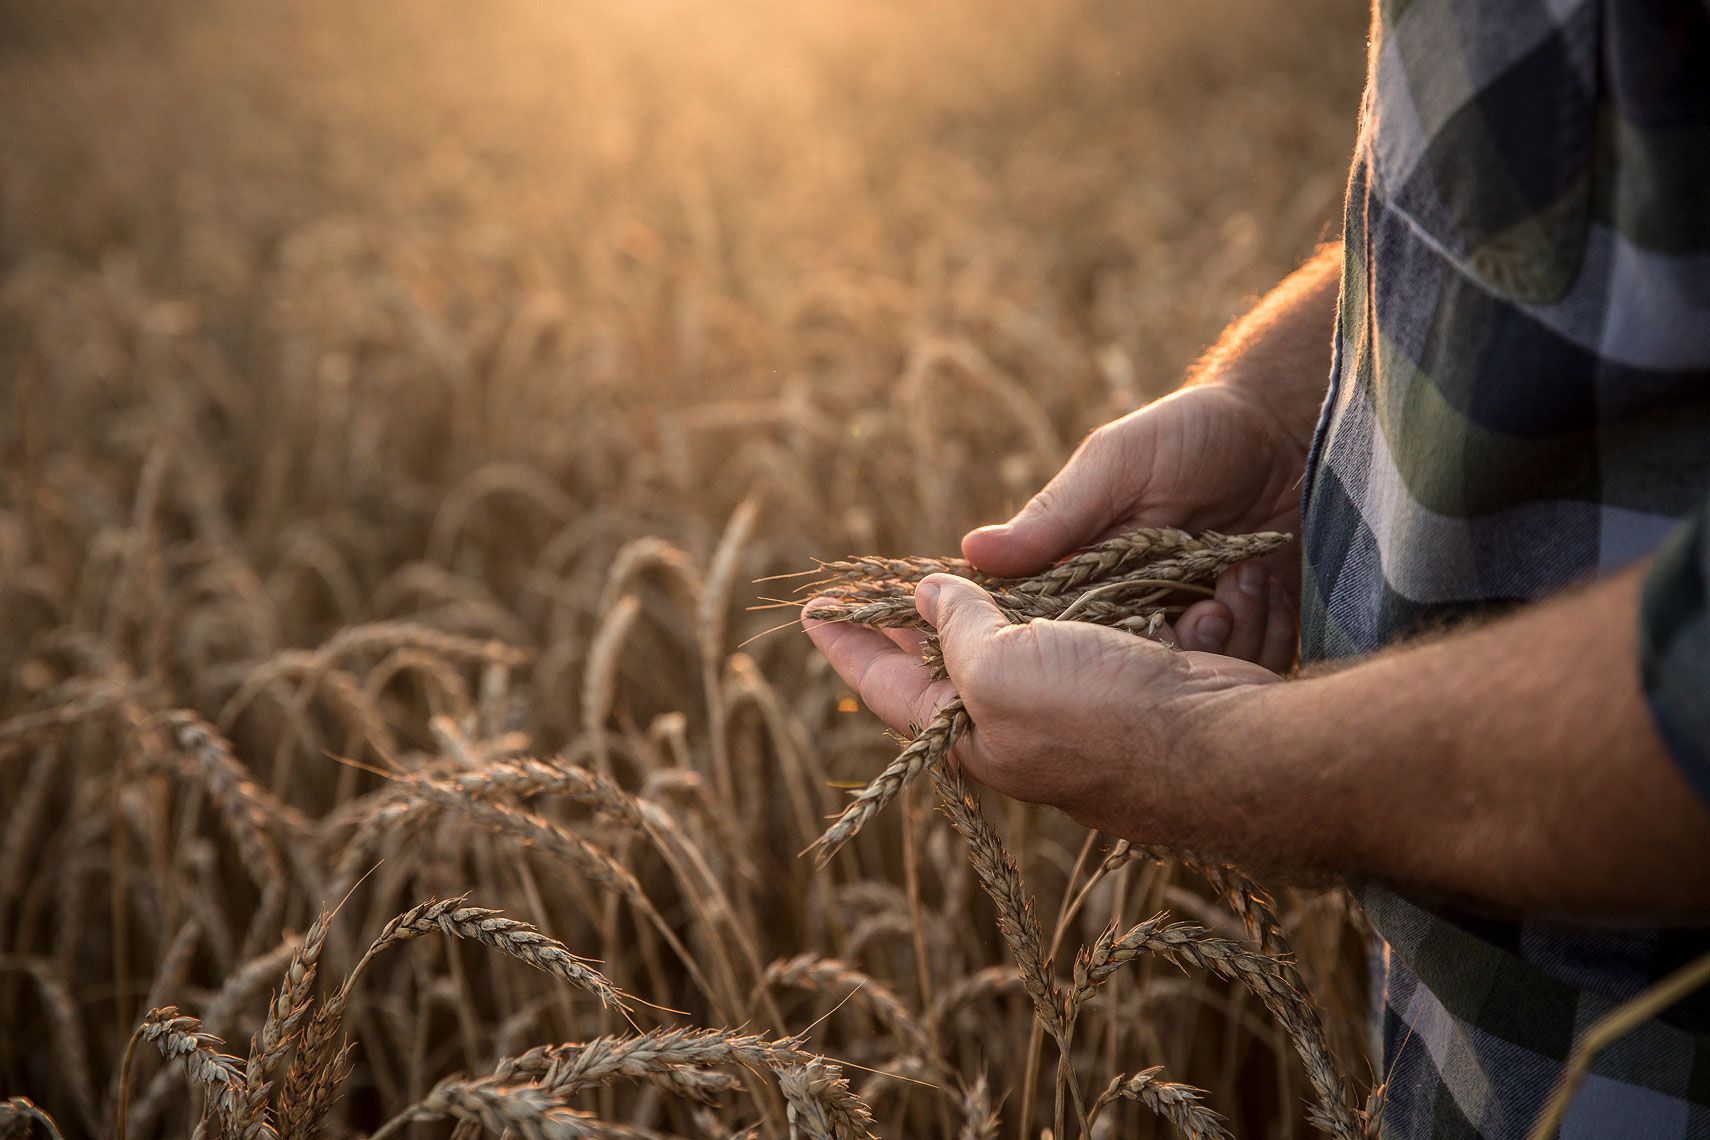 Rye field close up with hands | Whiskey Acres Distillery | John Fedele Agricultural Photography